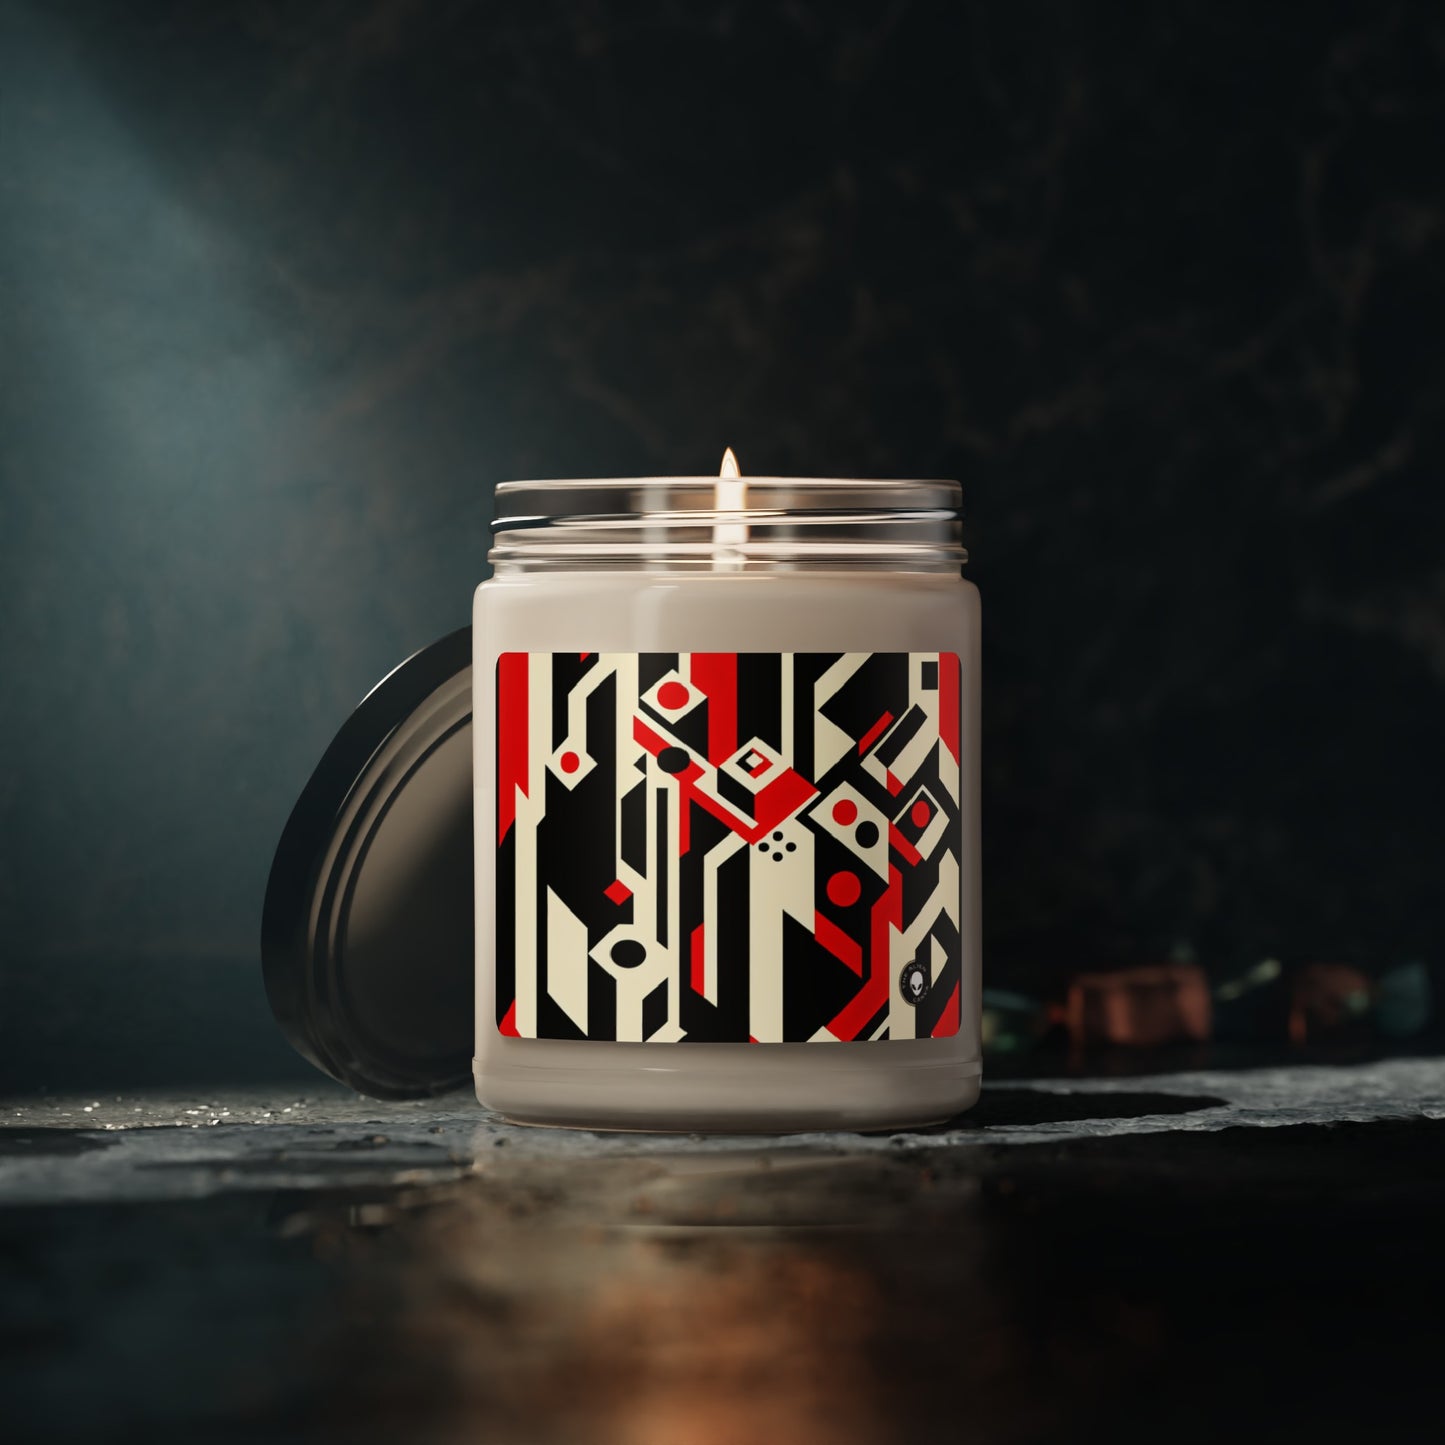 "Futuristic Metropolis: A Constructivist Expression of Urban Technology" - The Alien Scented Soy Candle 9oz Constructivism